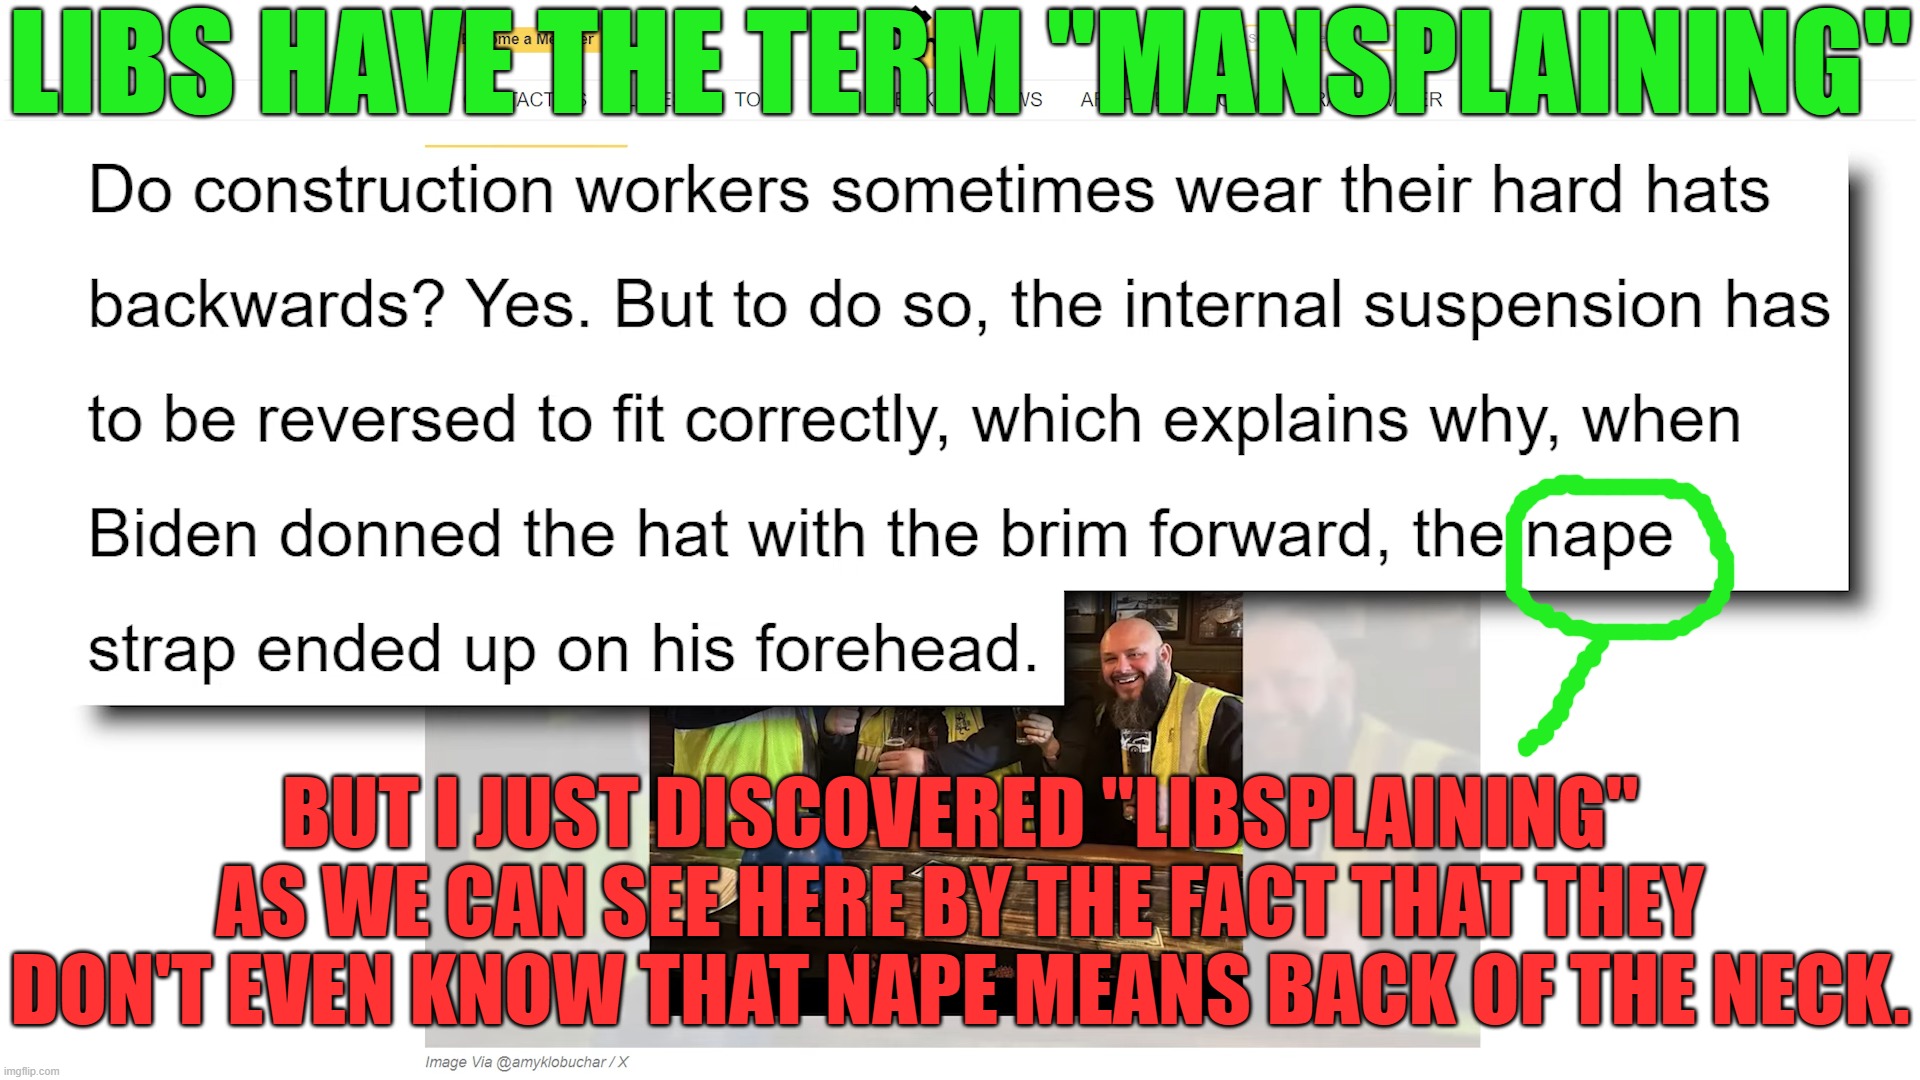 Libsplaining | LIBS HAVE THE TERM "MANSPLAINING"; BUT I JUST DISCOVERED "LIBSPLAINING" AS WE CAN SEE HERE BY THE FACT THAT THEY DON'T EVEN KNOW THAT NAPE MEANS BACK OF THE NECK. | image tagged in libsplaining,mansplaining,fact check | made w/ Imgflip meme maker